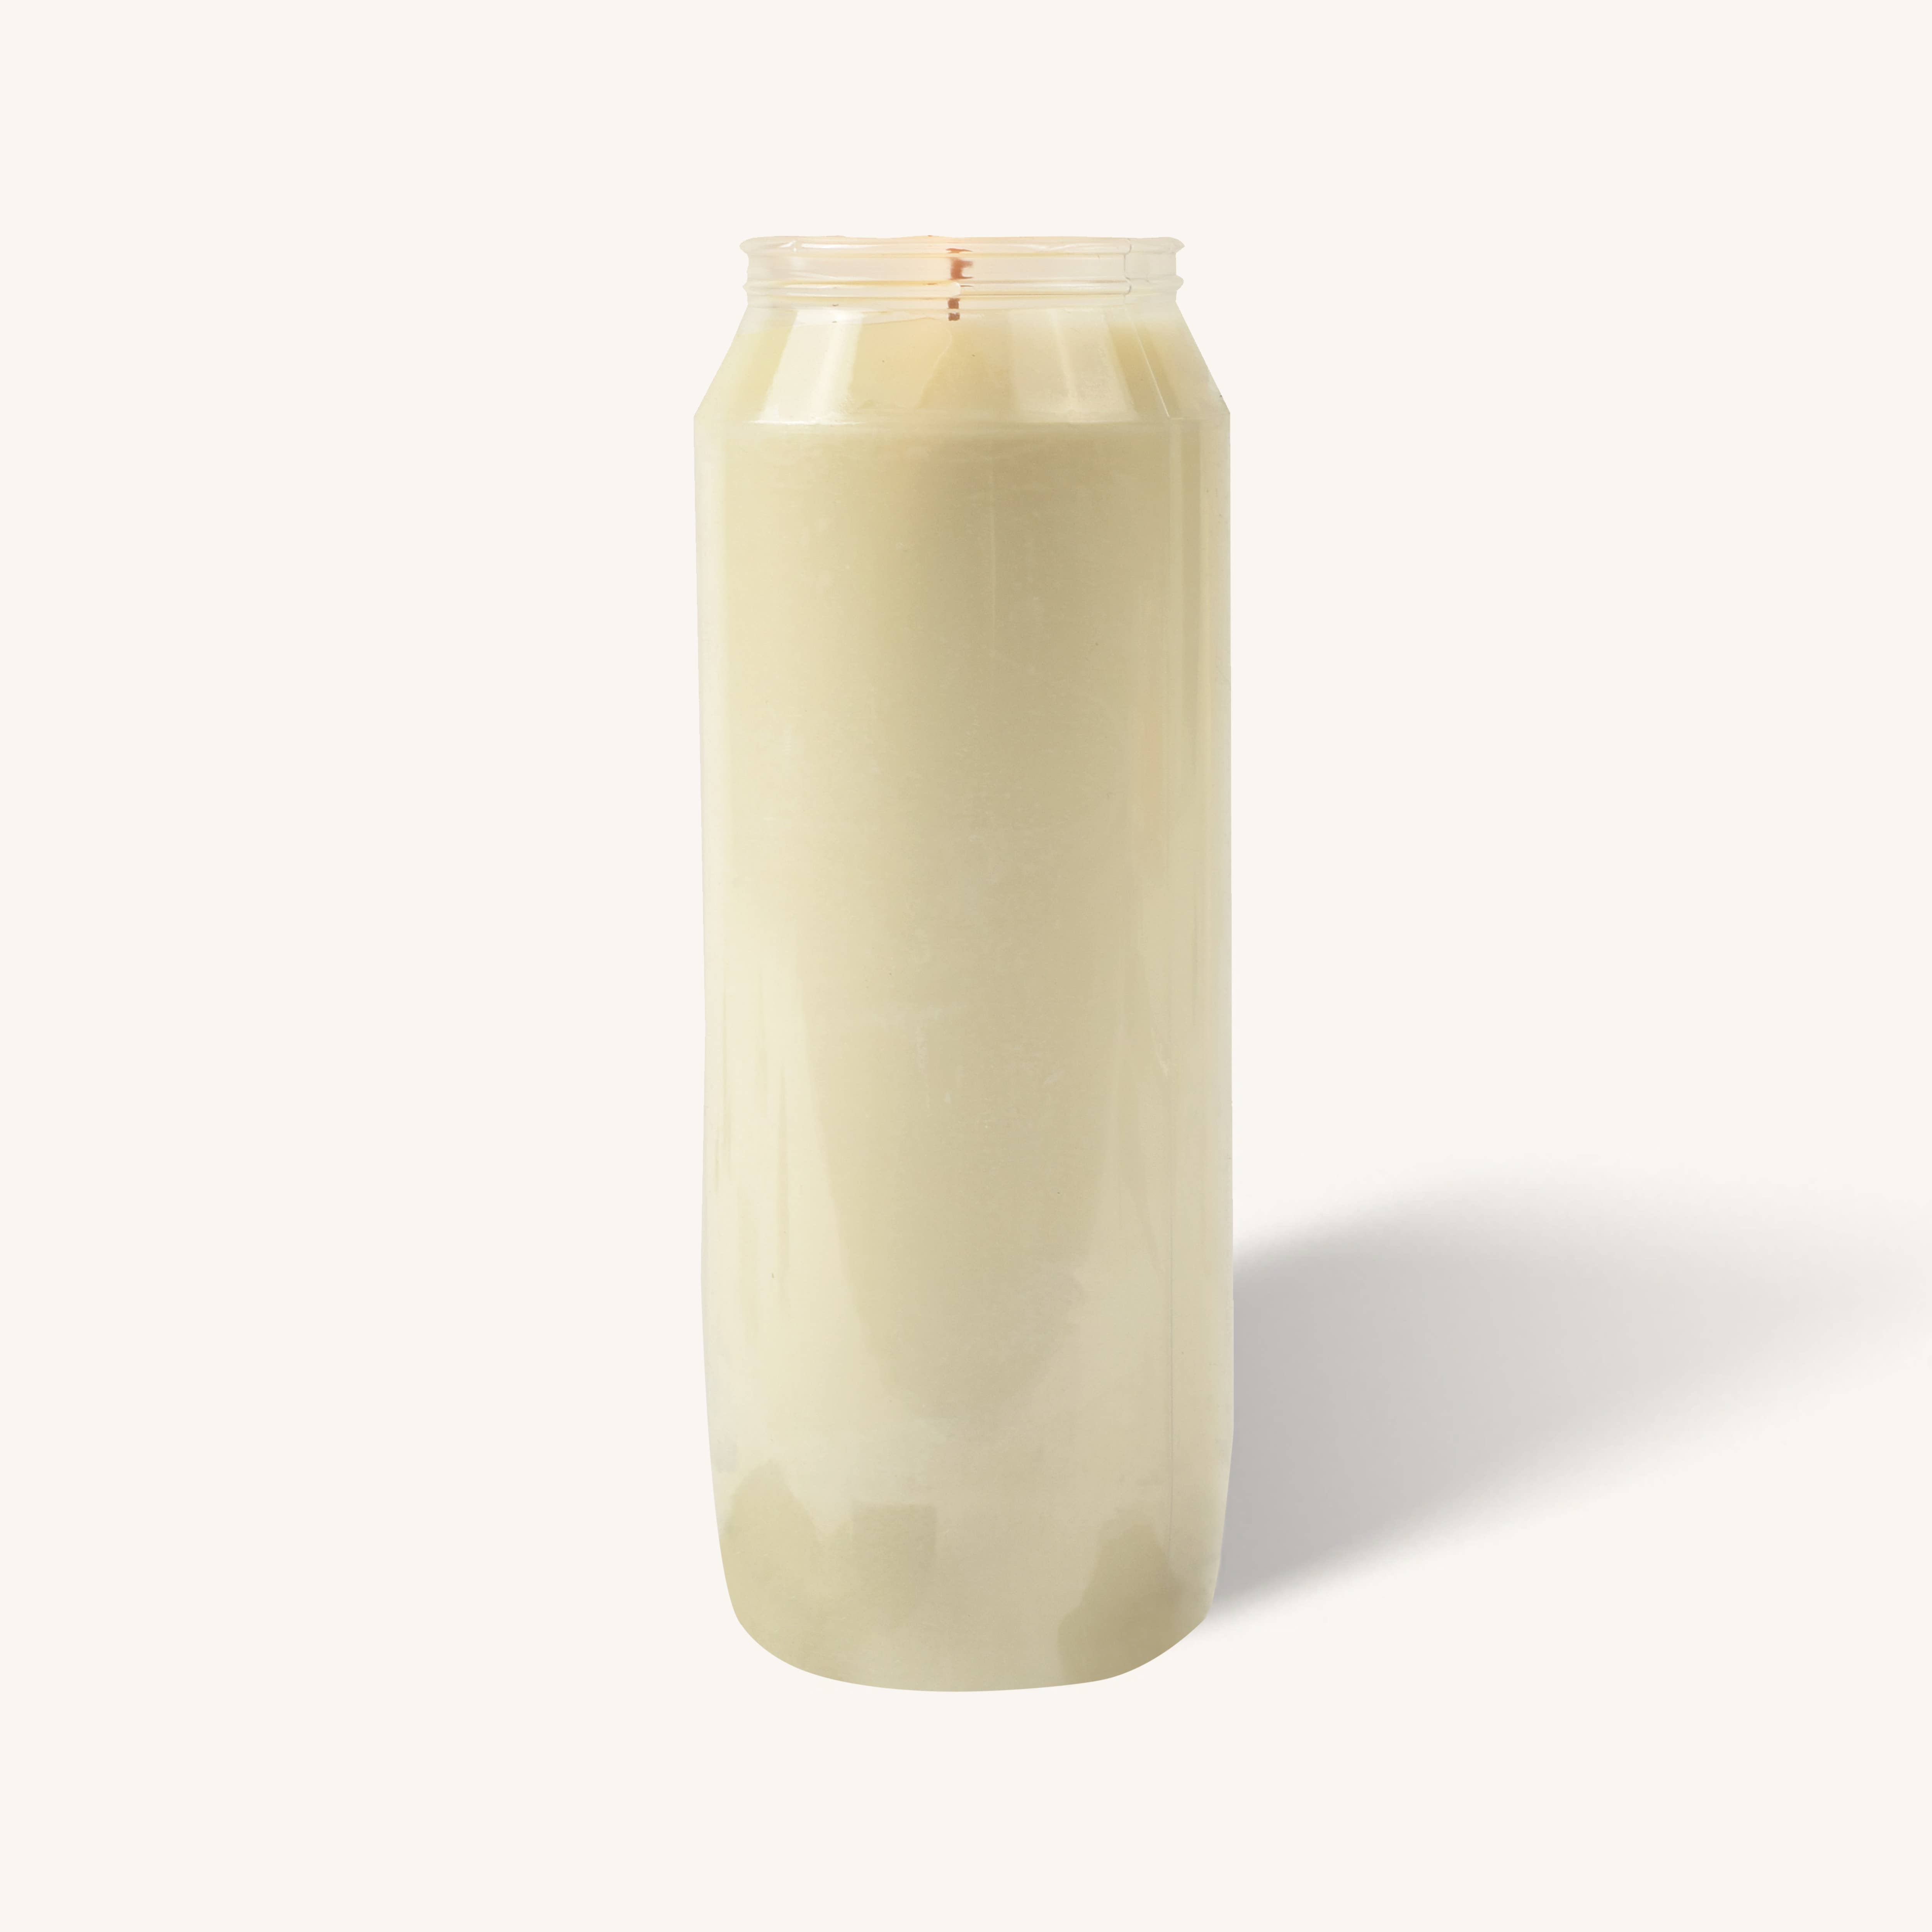 White Emergency, Prayer Candle in Plastic Cup - 9 Day